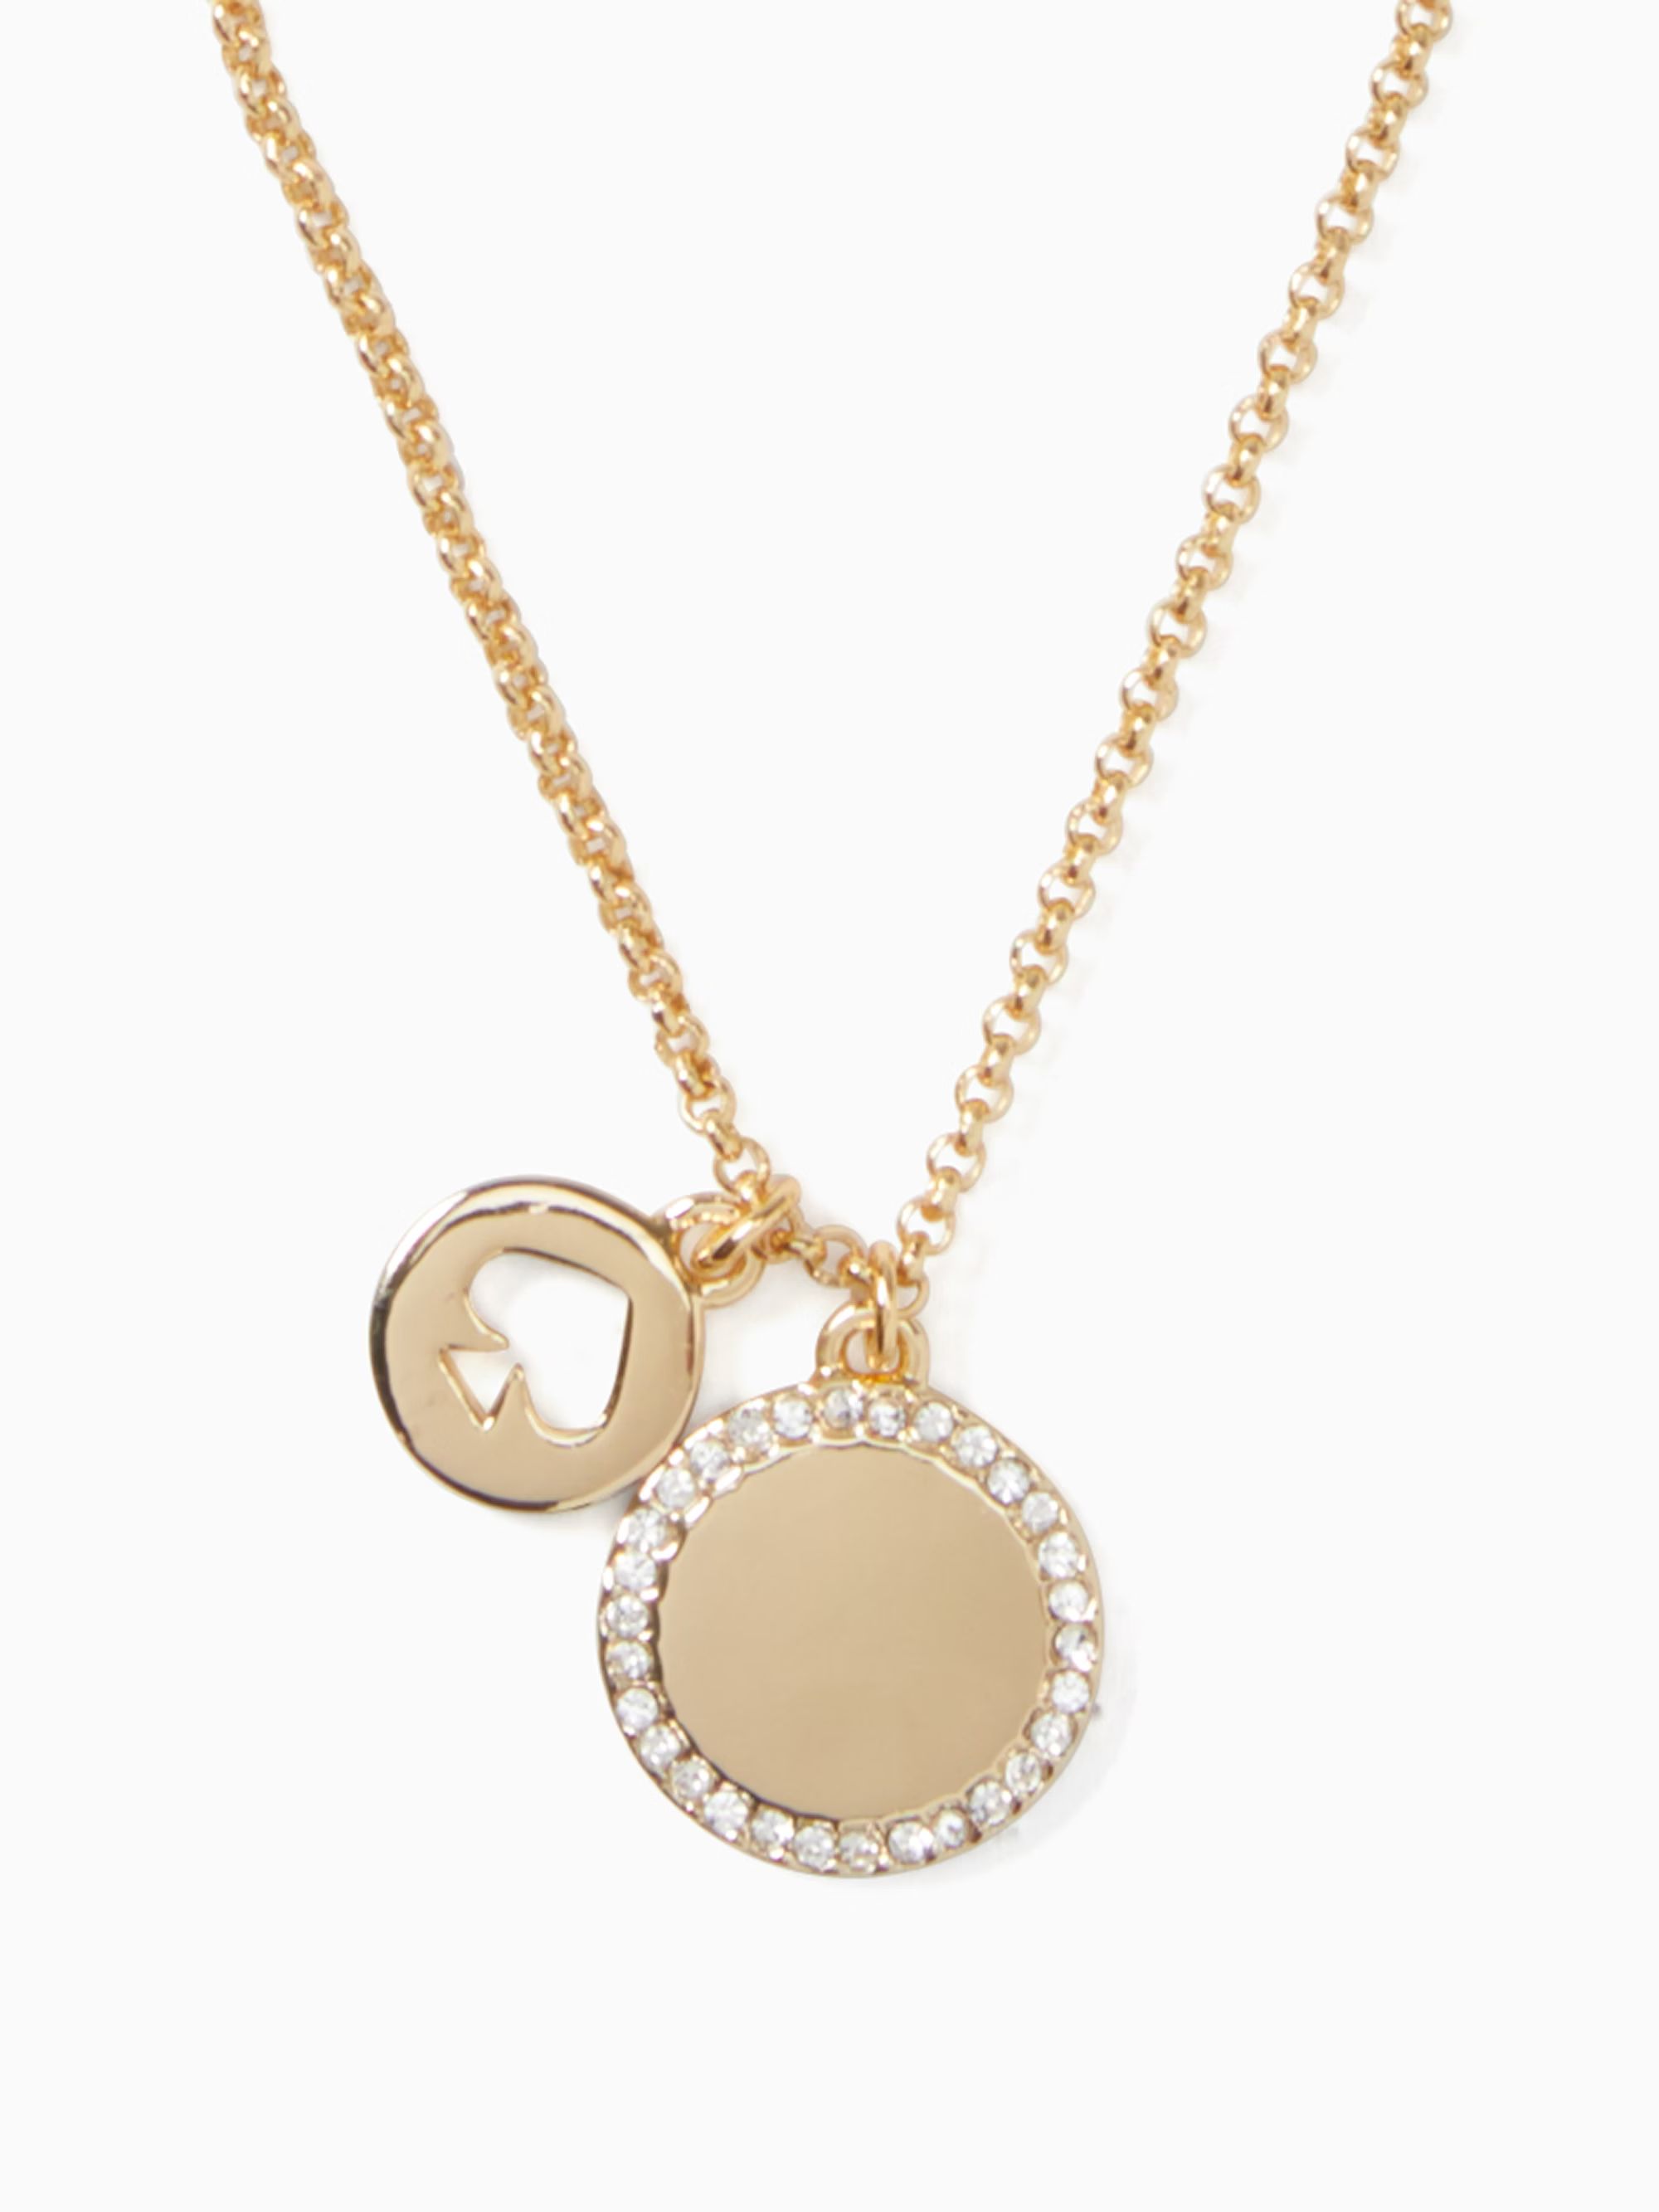 spot the spade pave charm pendant | Kate Spade Outlet